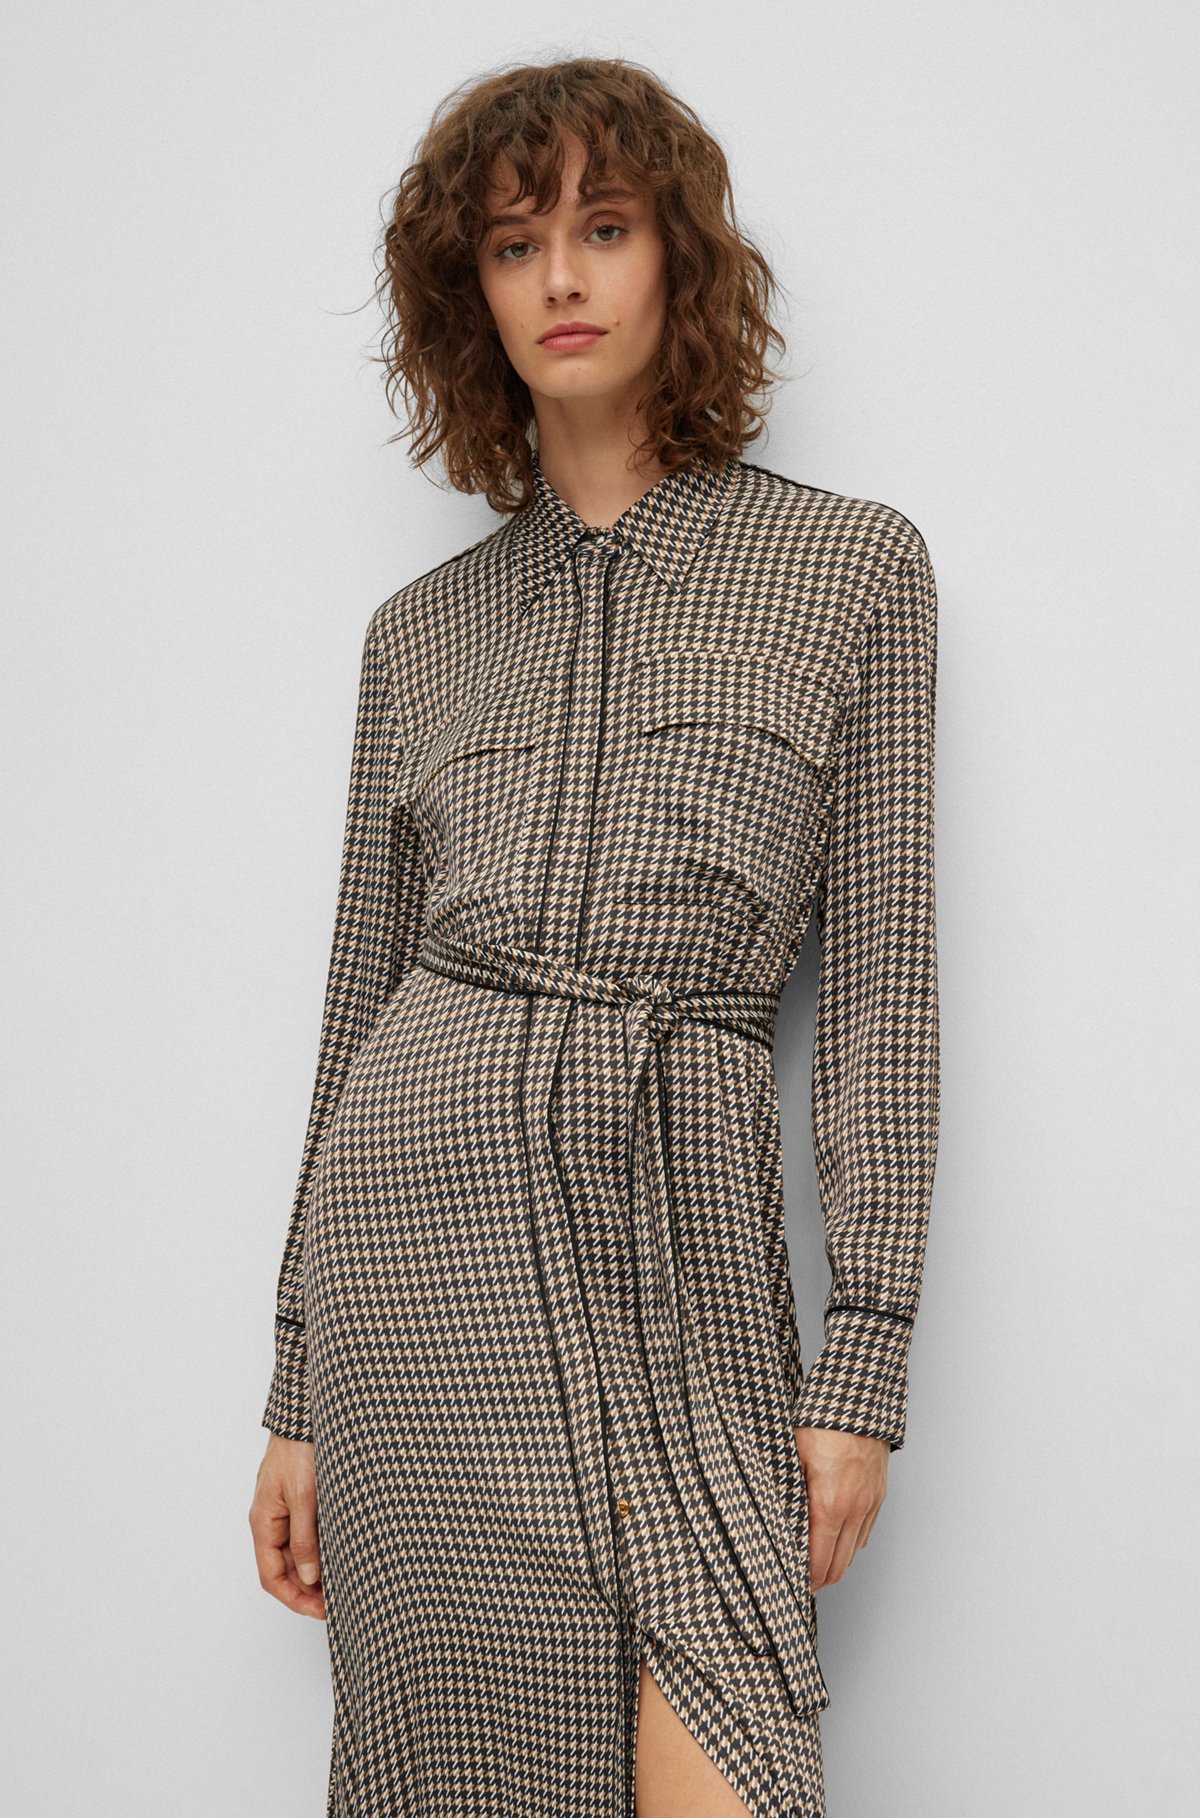 Long-sleeved shirt dress with houndstooth motif, Patterned